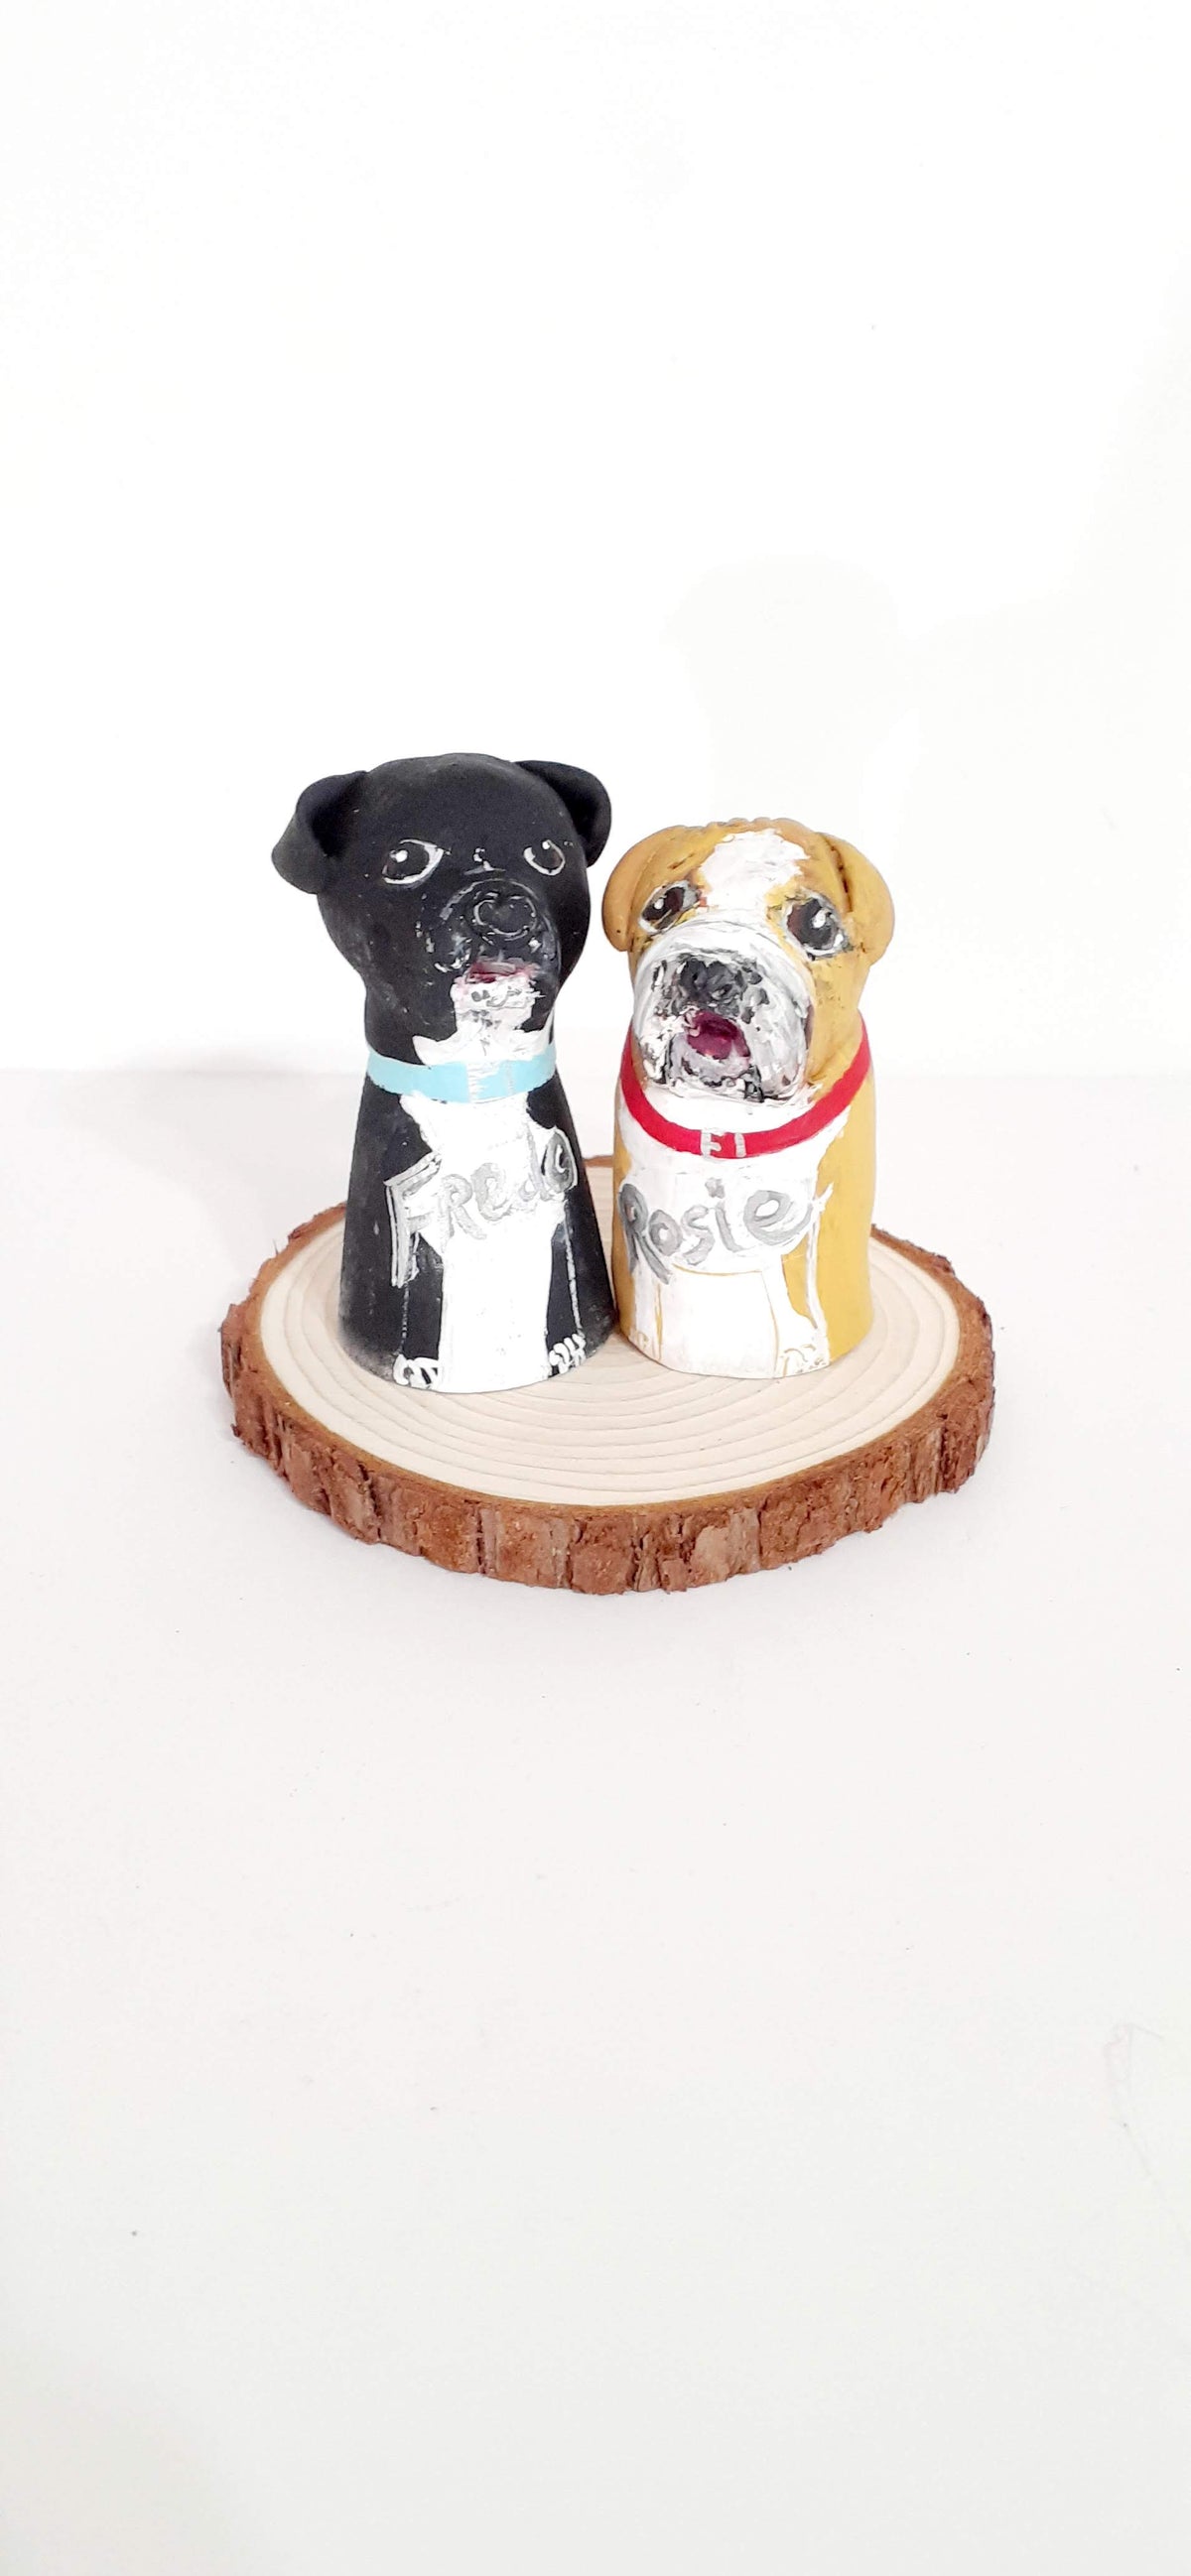 Two sweet peg doll puppies sculpted with clay